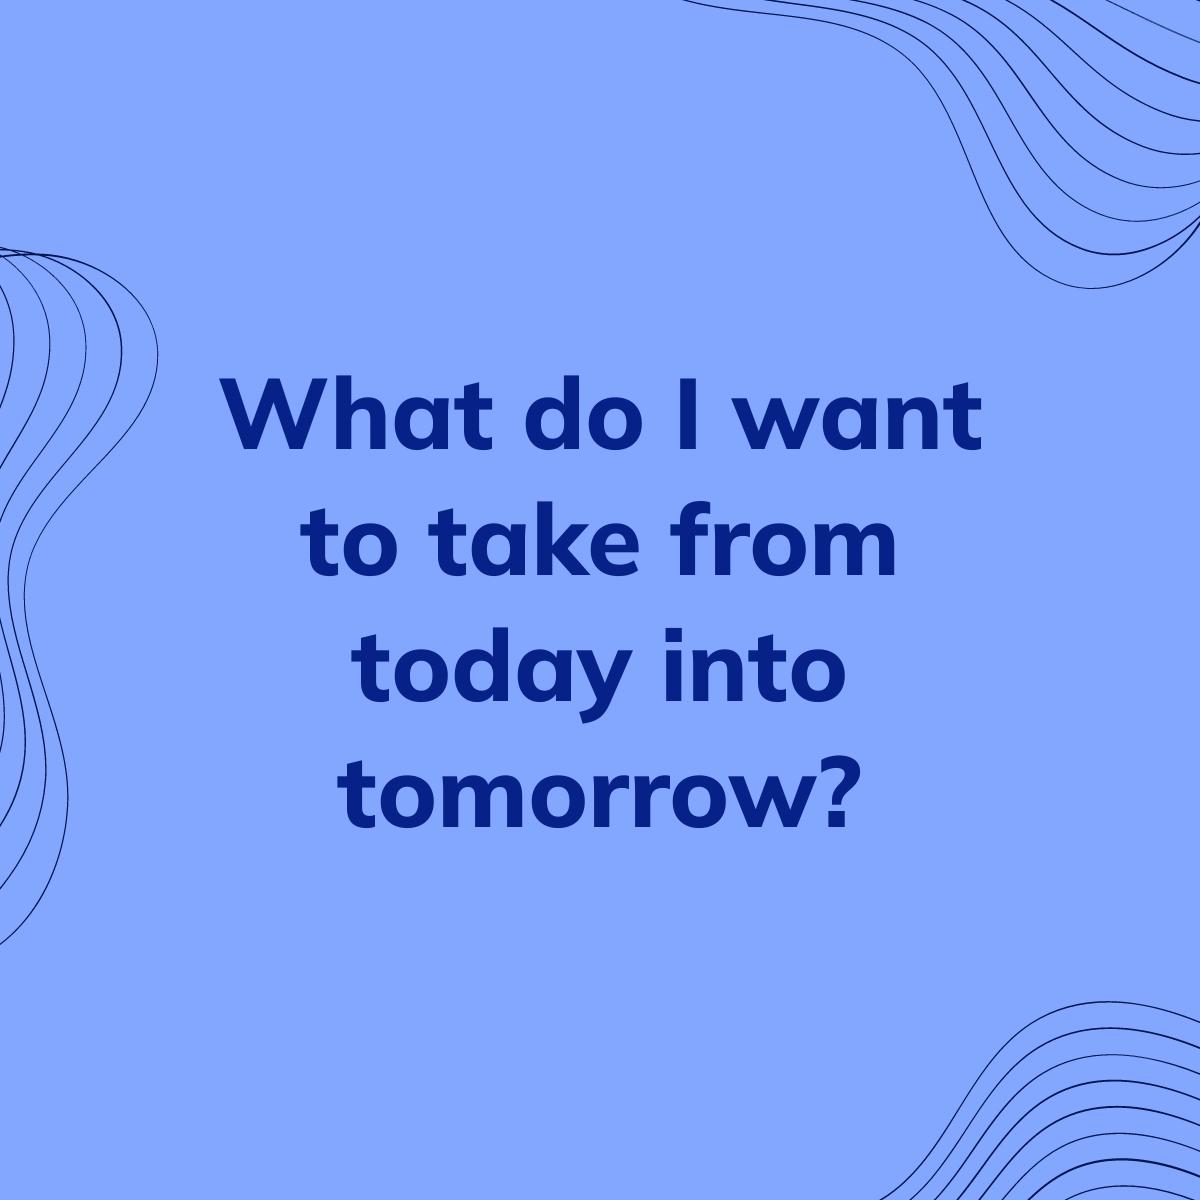 Journal Prompt: What do I want to take from today into tomorrow?